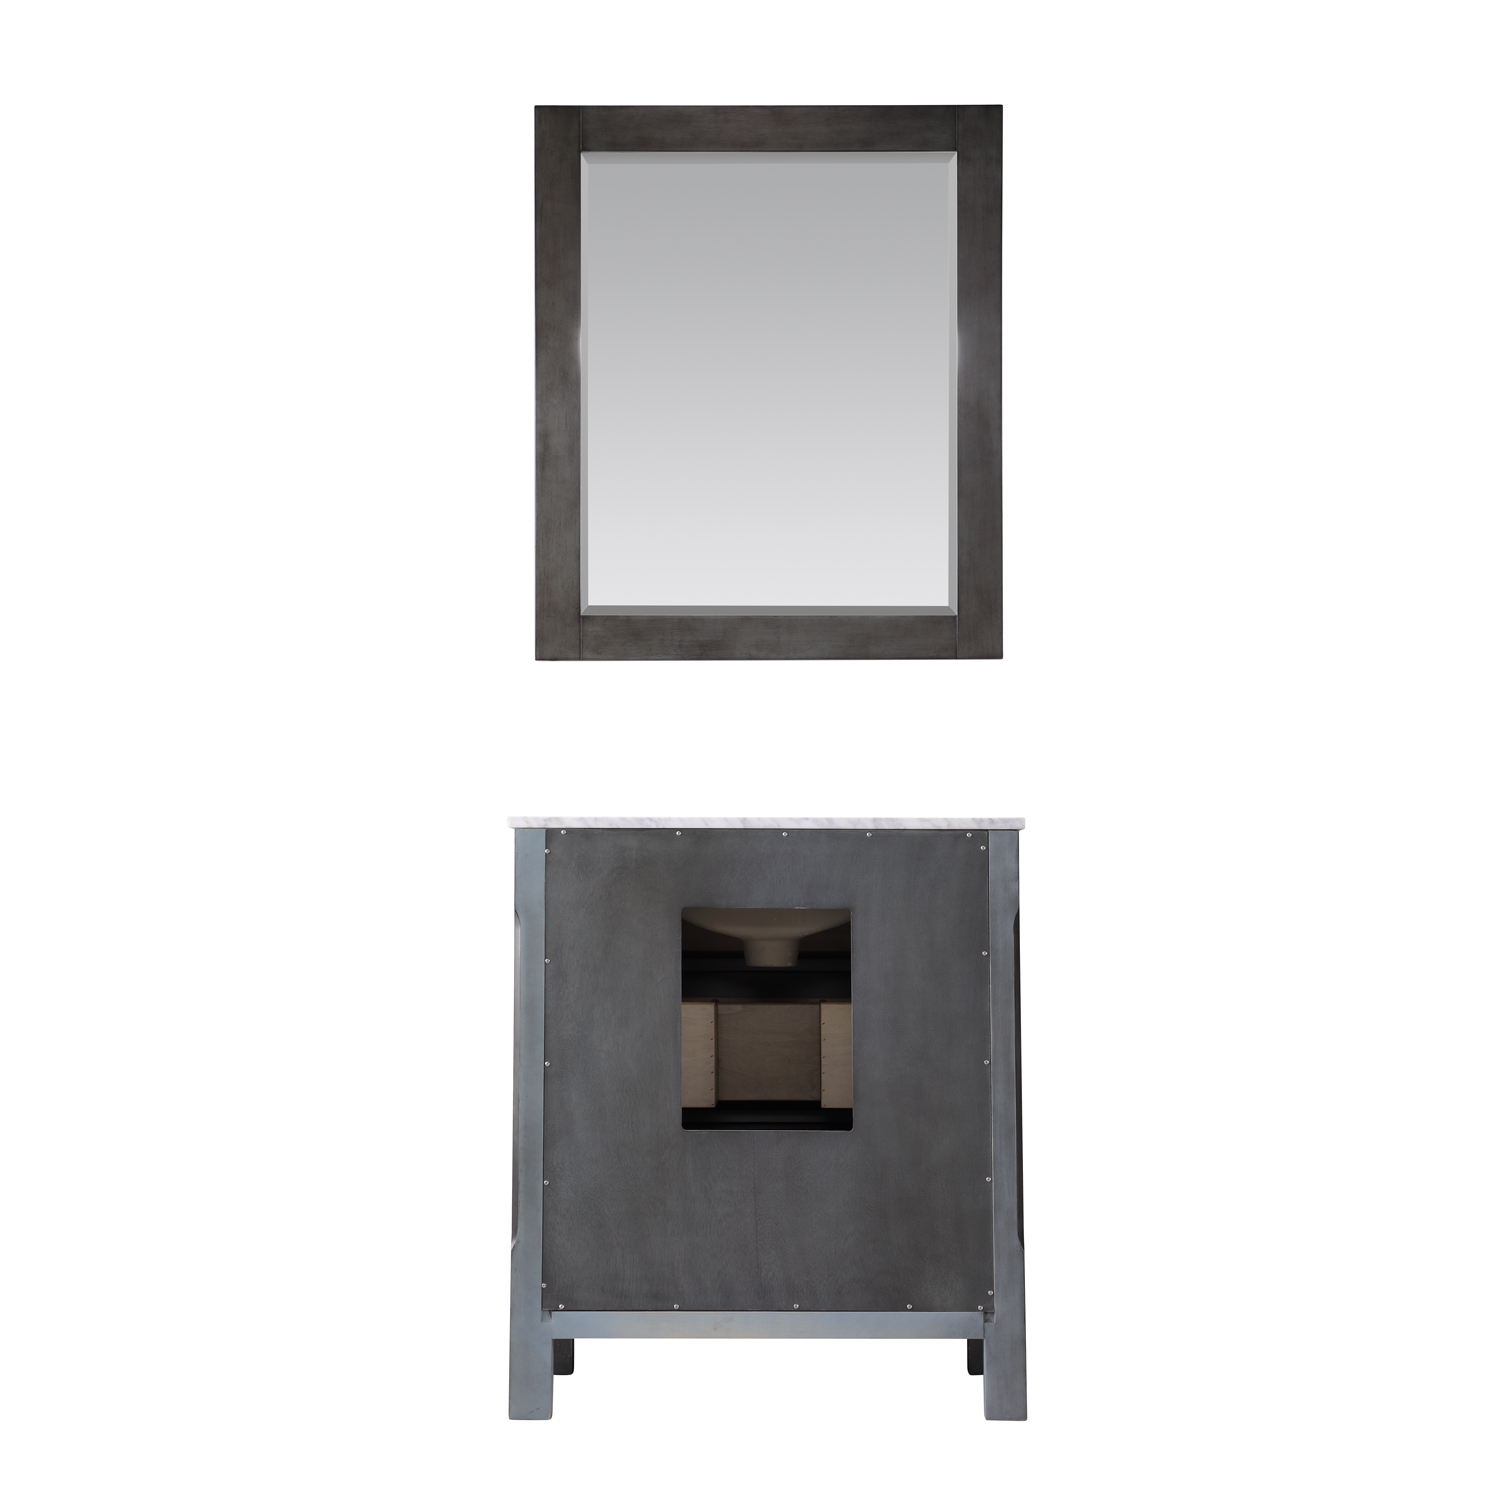 Issac Edwards Collection 30" Single Bathroom Vanity Set in Rust Black and Carrara White Marble Countertop without Mirror